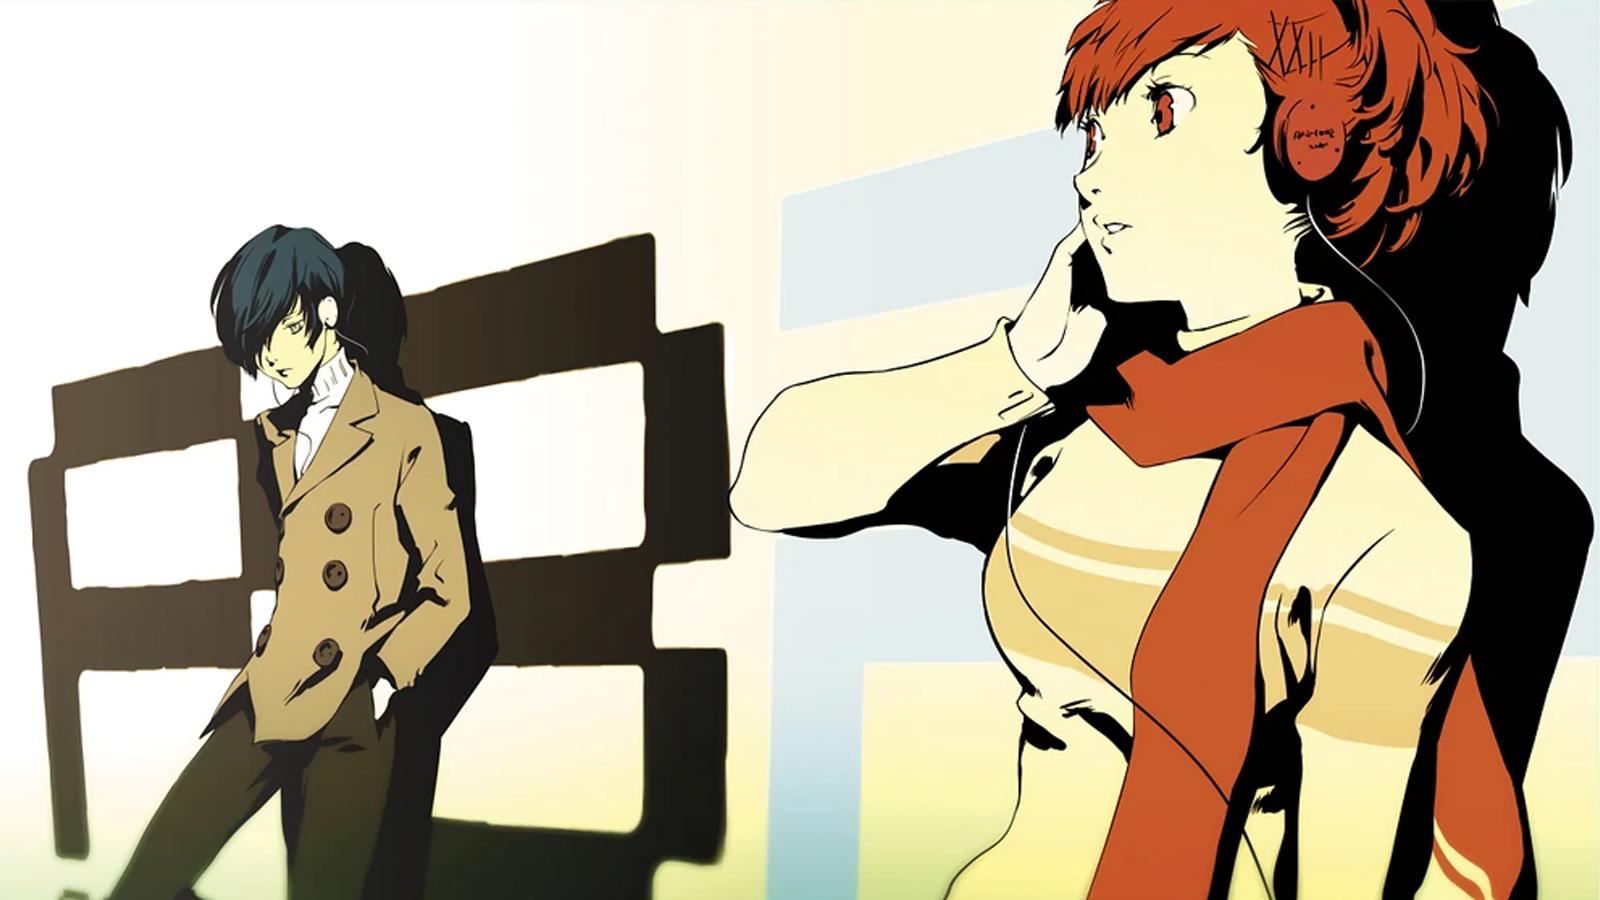 The male and female protagonists from Persona 3